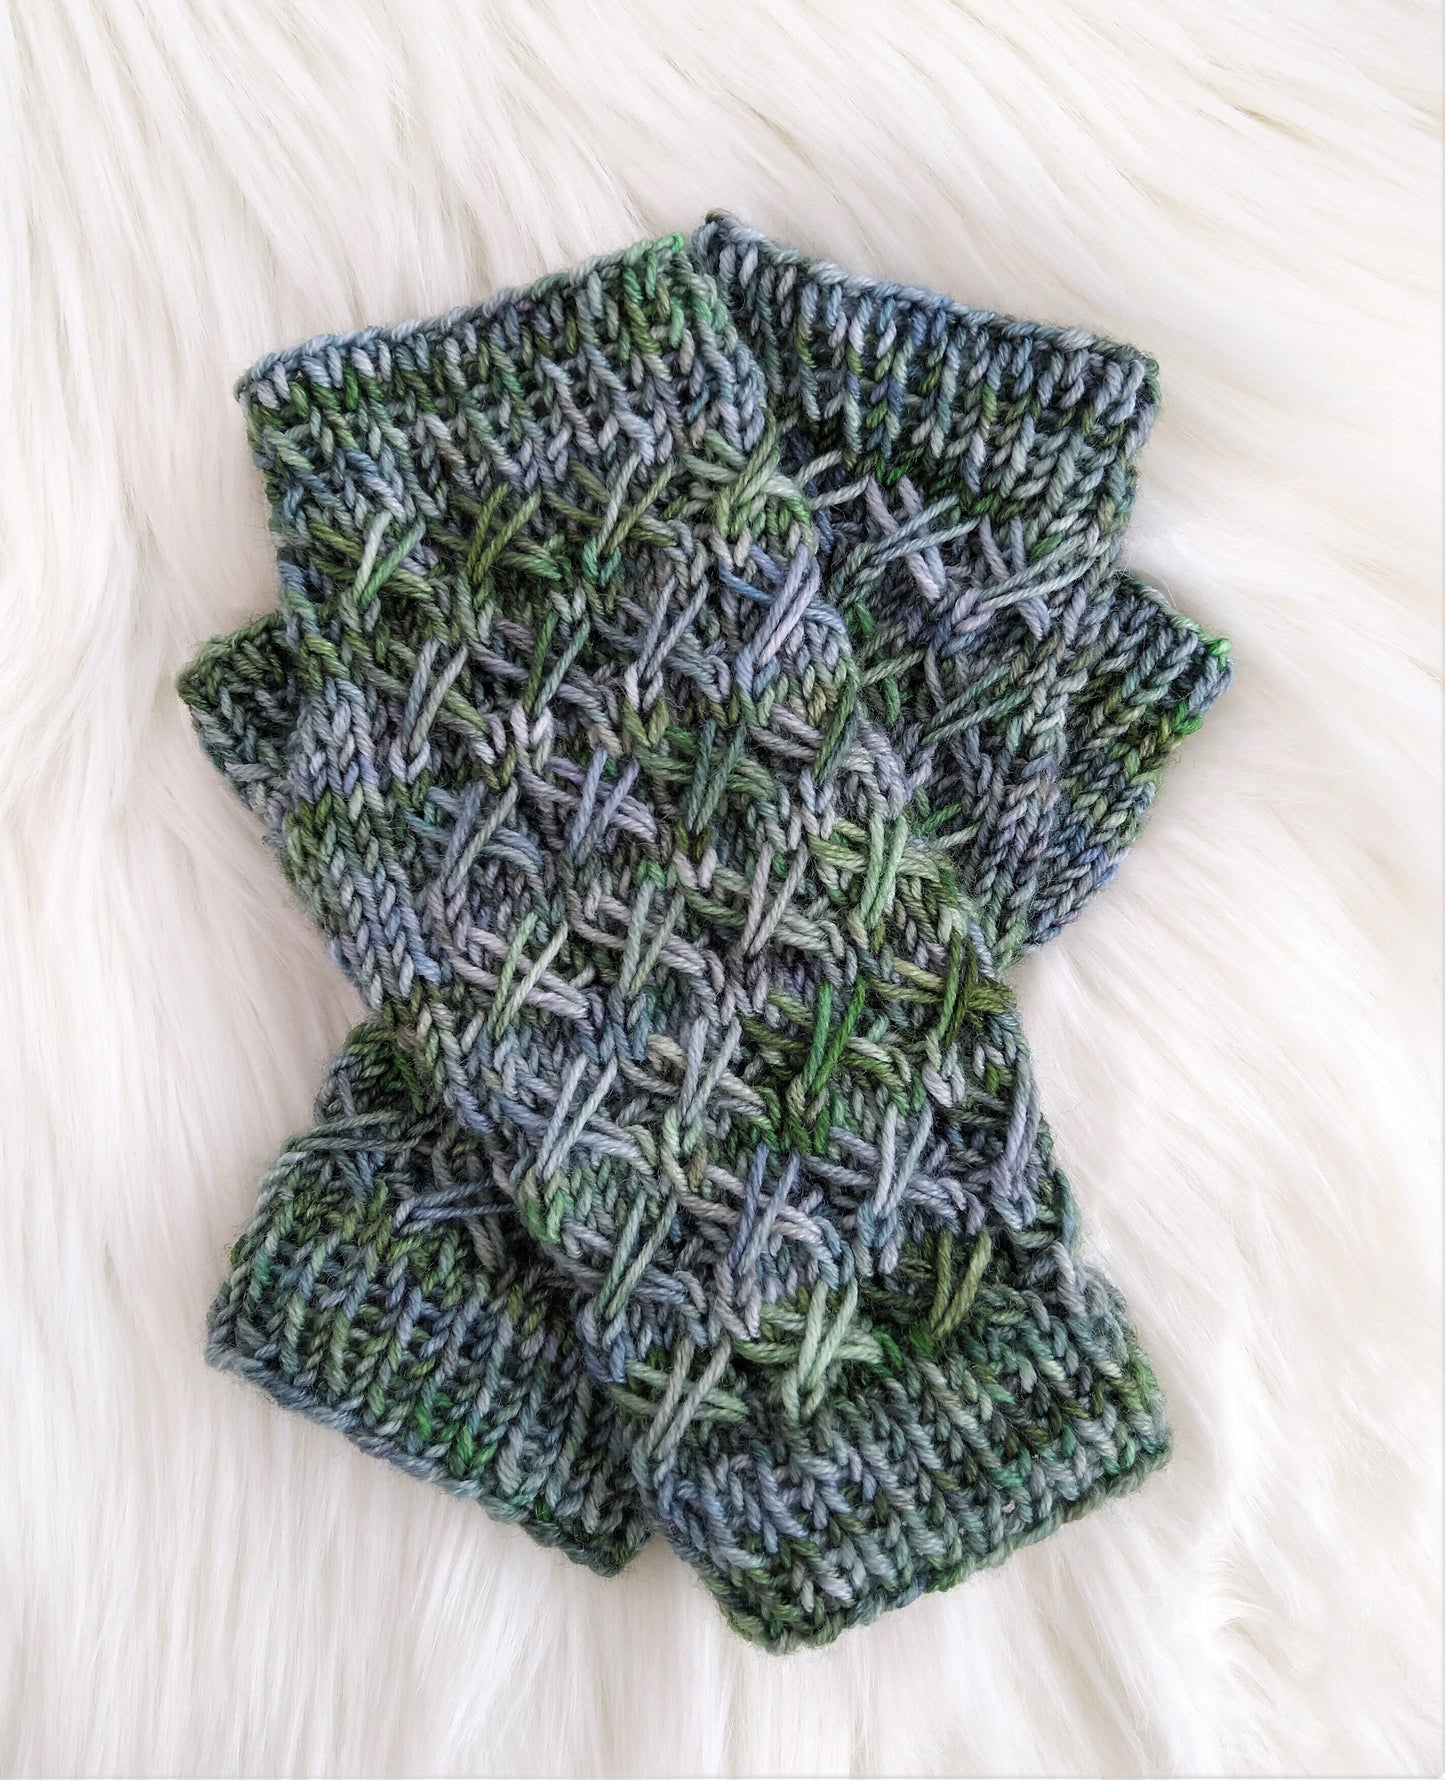 Unbreakable Vow Mitts Knitting Pattern